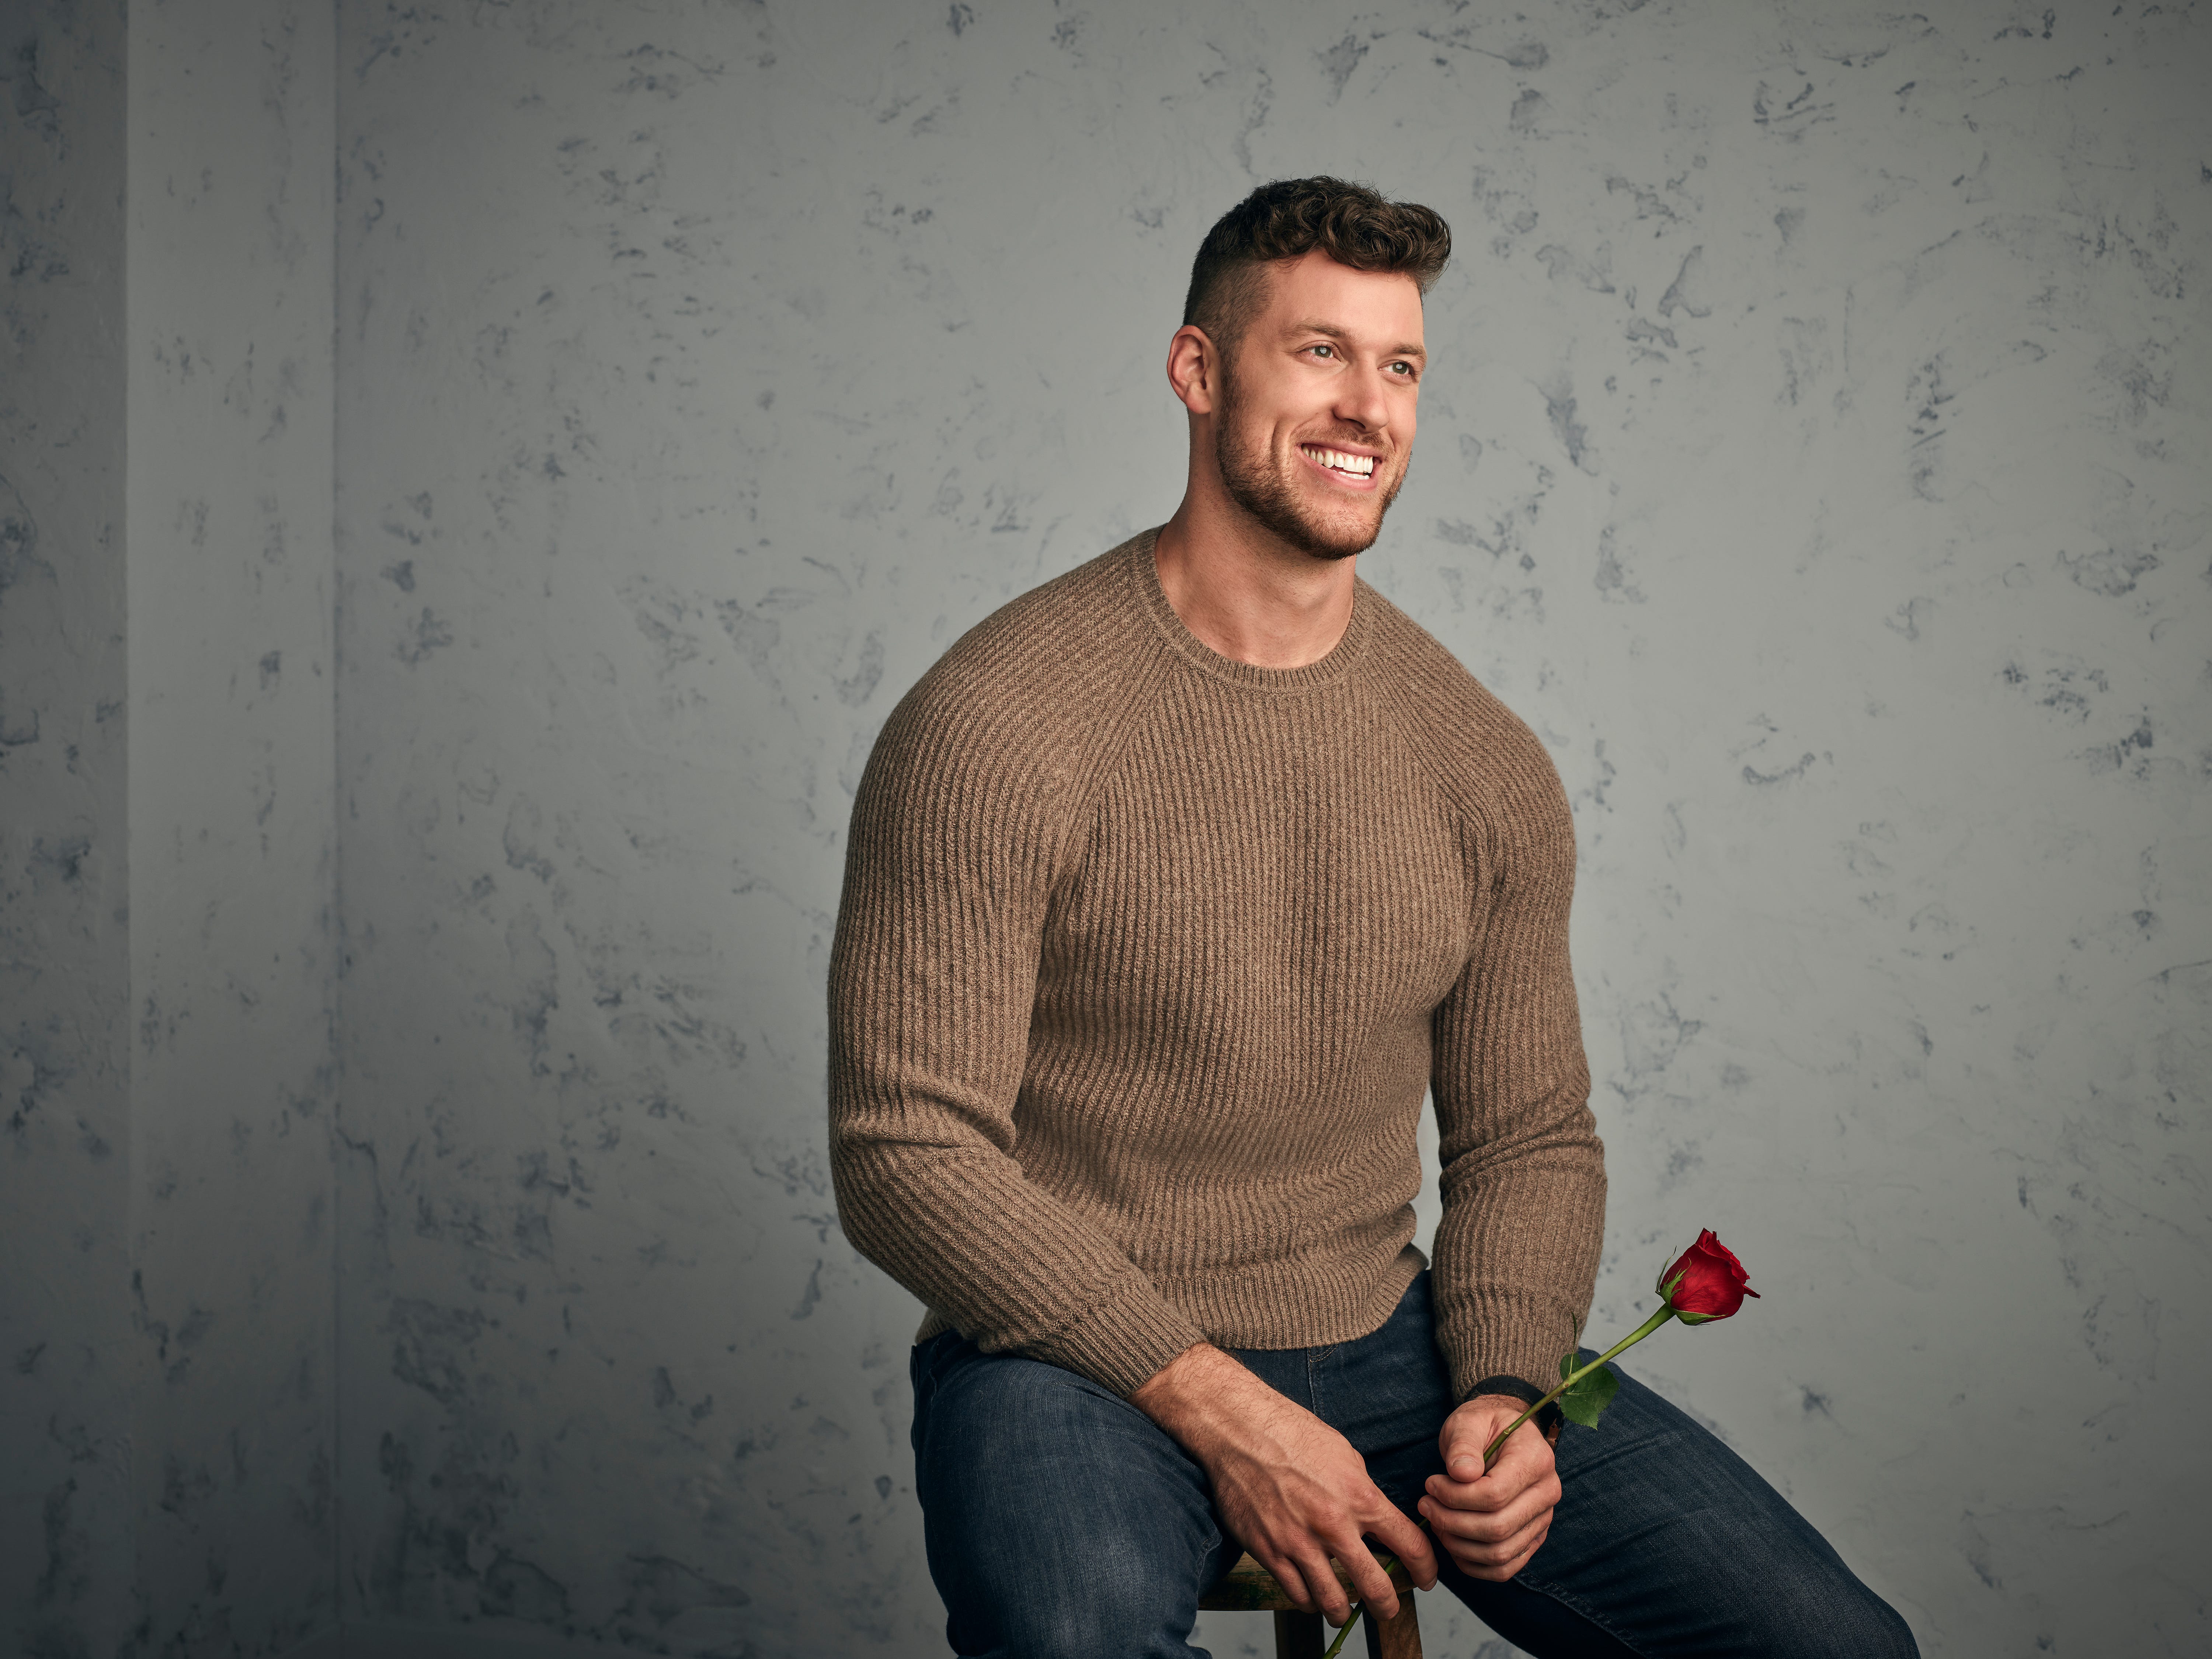 'Bachelor' finale recap, Pt. 2: Mizzou football alum Clayton Echard's proposal rejected by Susie, but they end up together